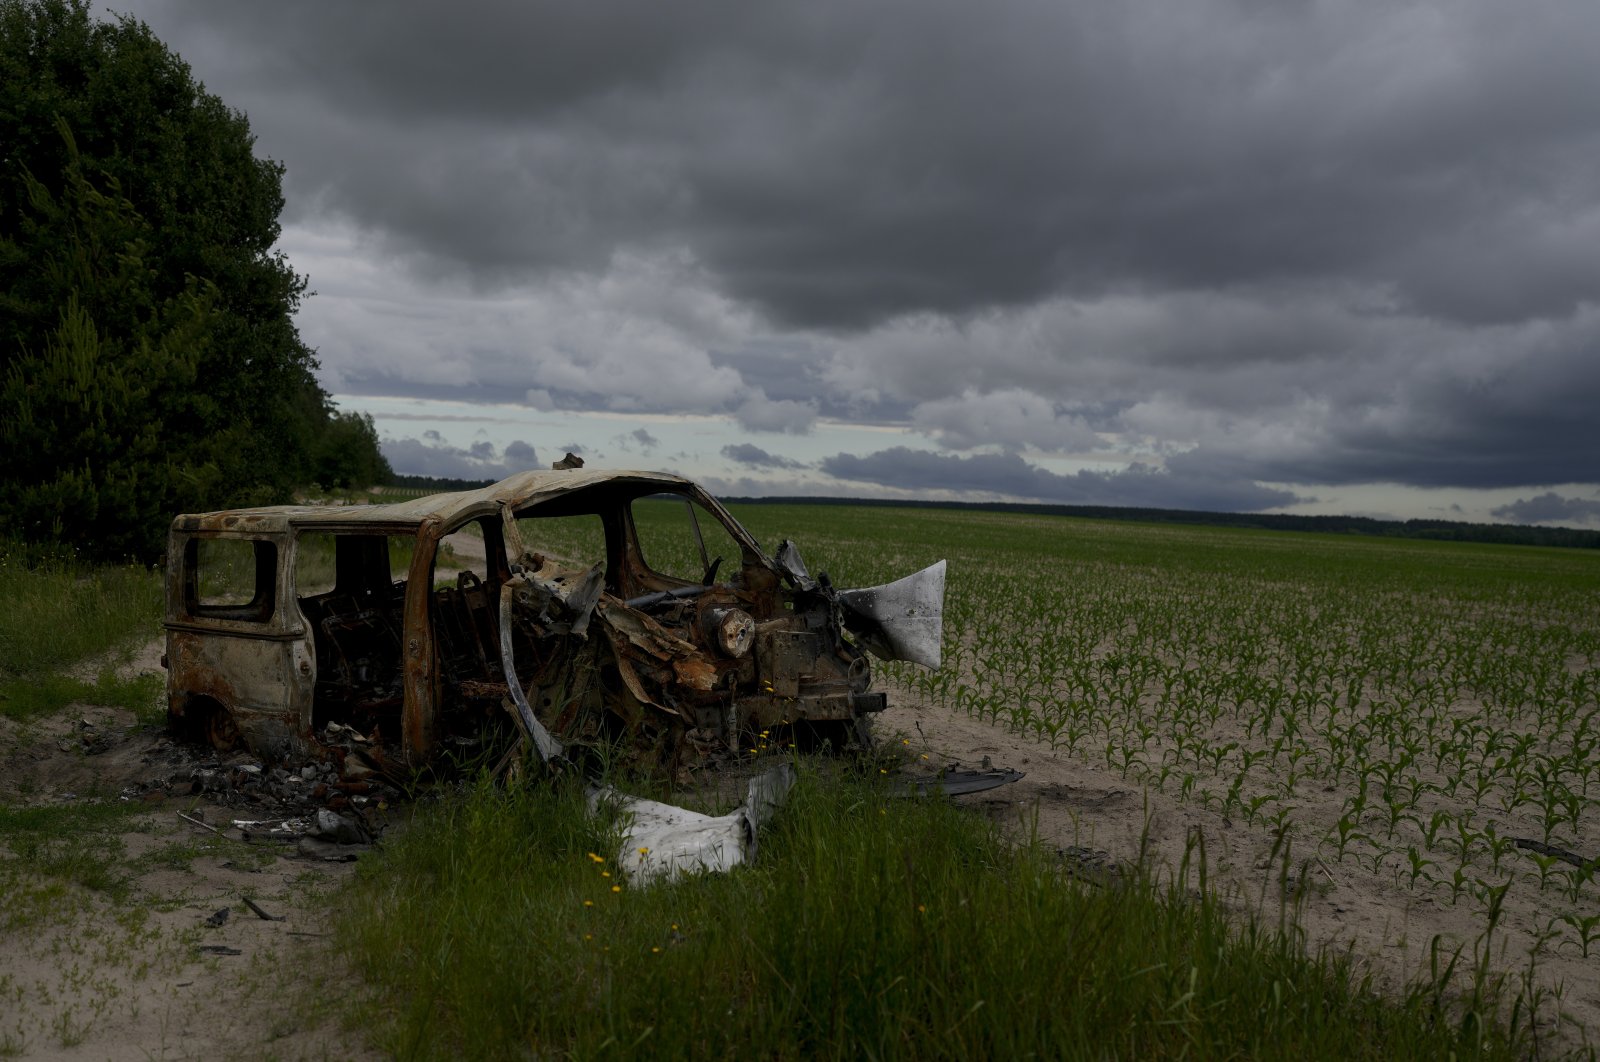 The wreckage of a burned out van that triggered an anti-tank mine, killing its three occupants, lies by the side of a dirt track in Andriyivka, on the outskirts of Kyiv, Ukraine, Tuesday, June 14, 2022. (AP Photo)